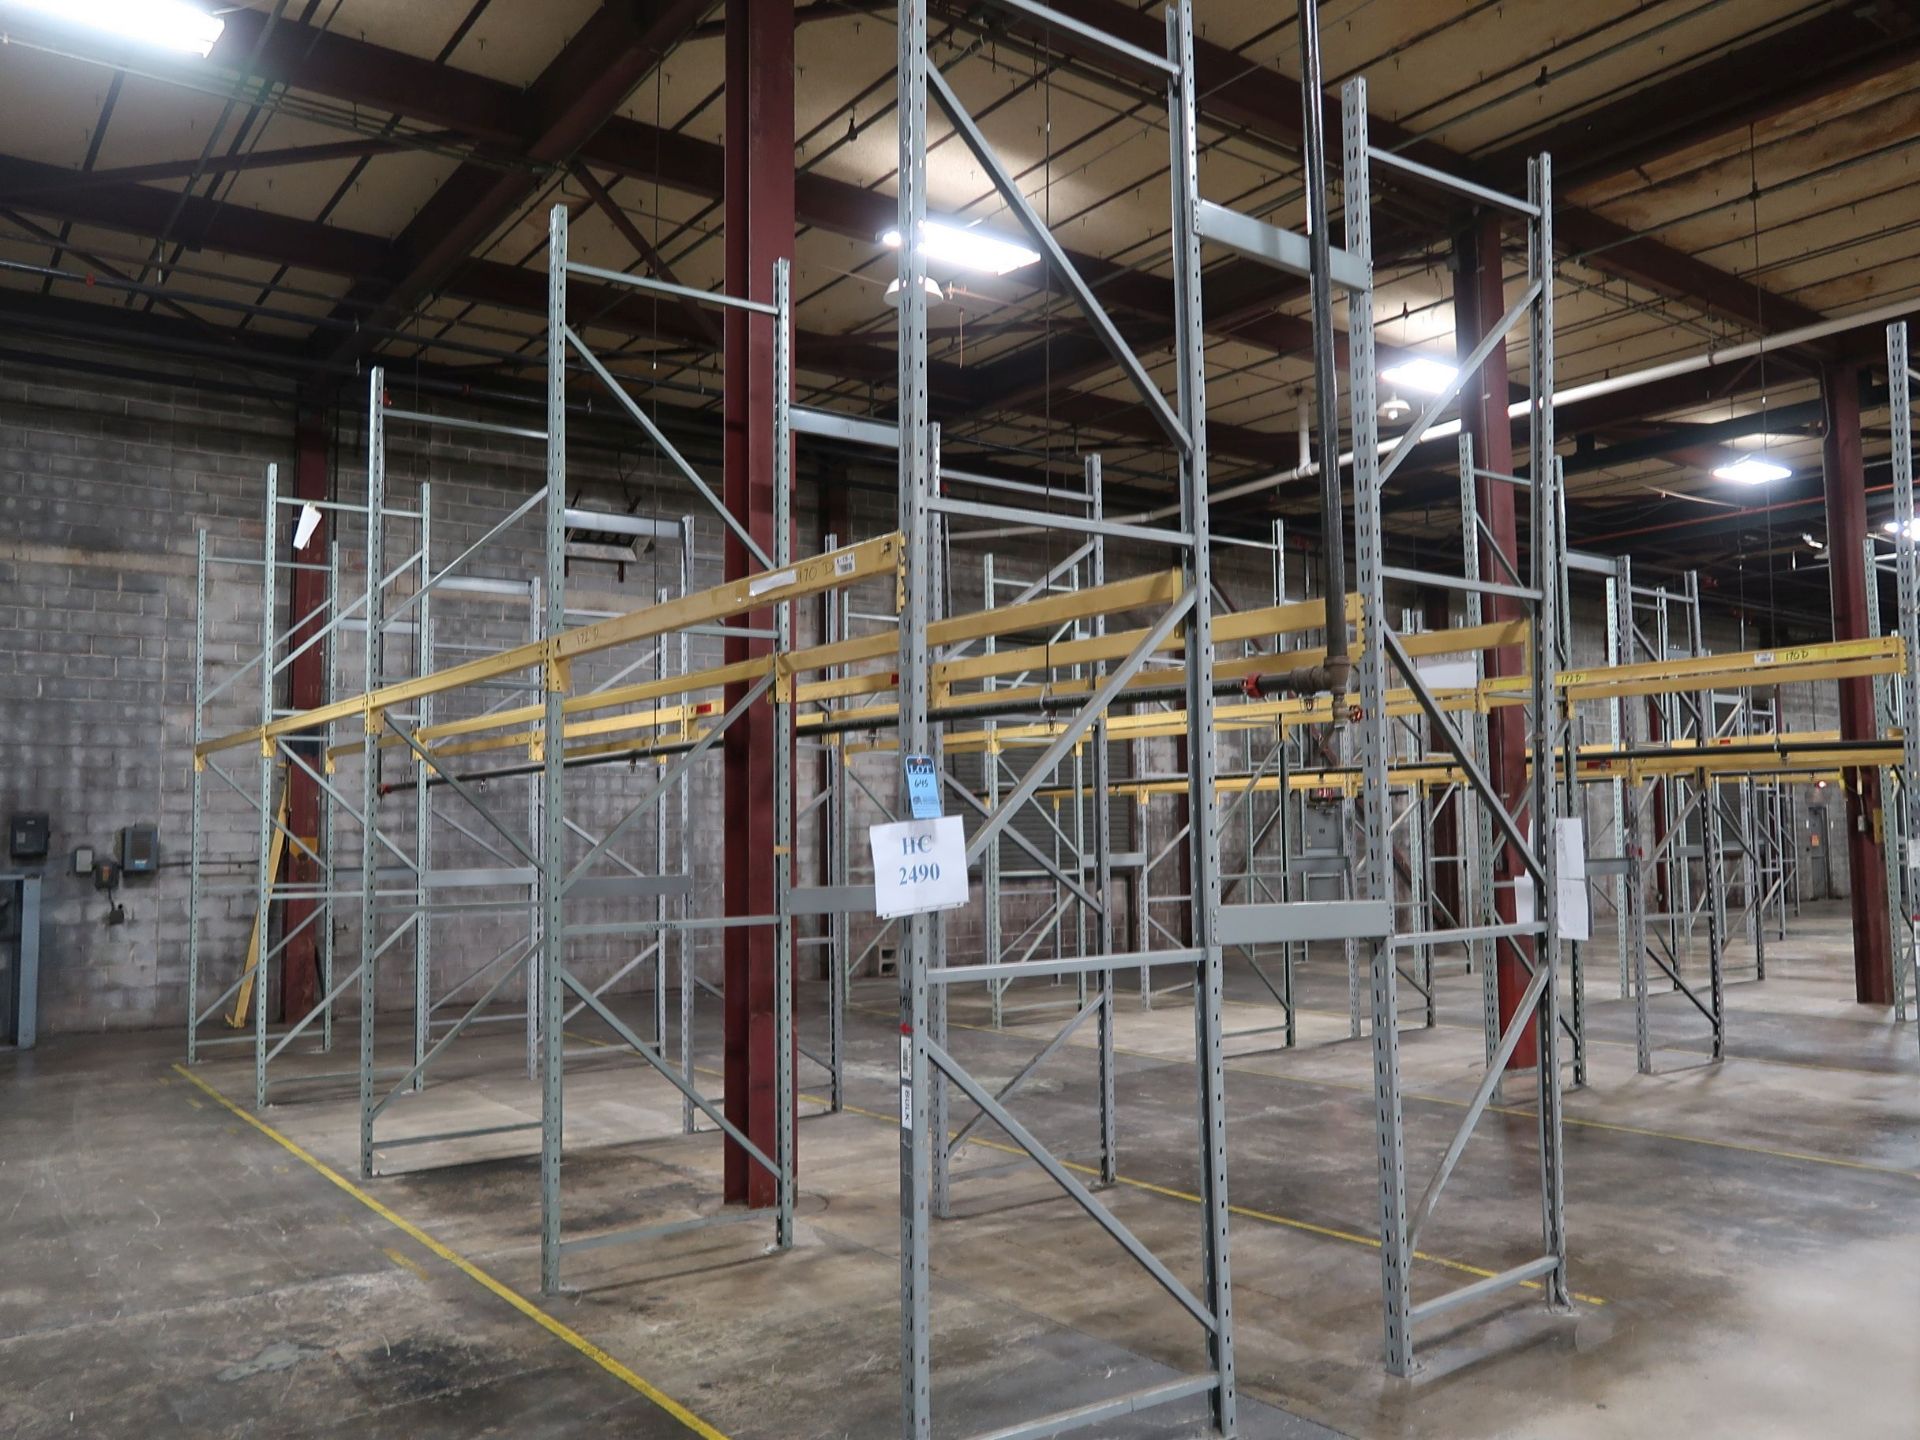 SECTIONS - (4) SECTIONS 96" X 42" X 168" & (4) SECTIONS 96" X 42" X 144" ADJUSTABLE BEAM PALLET